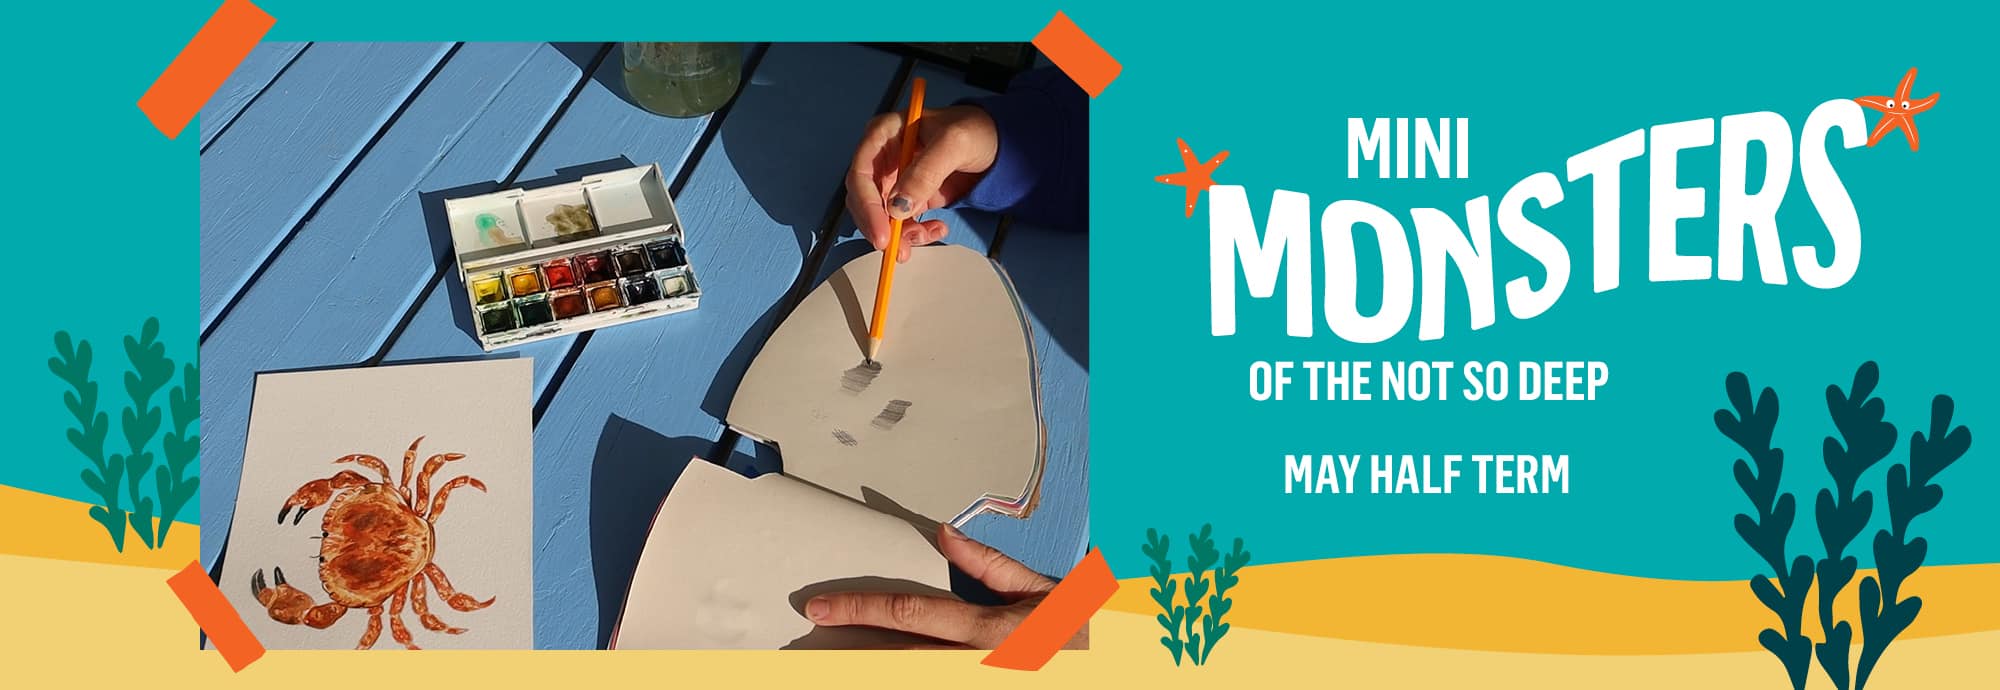 On the right, white text against a blue-green background reads 'Mini Monsters of the Not So Deep' and 'May half term'. On the left is a photo of someone in the process of painting a crab.